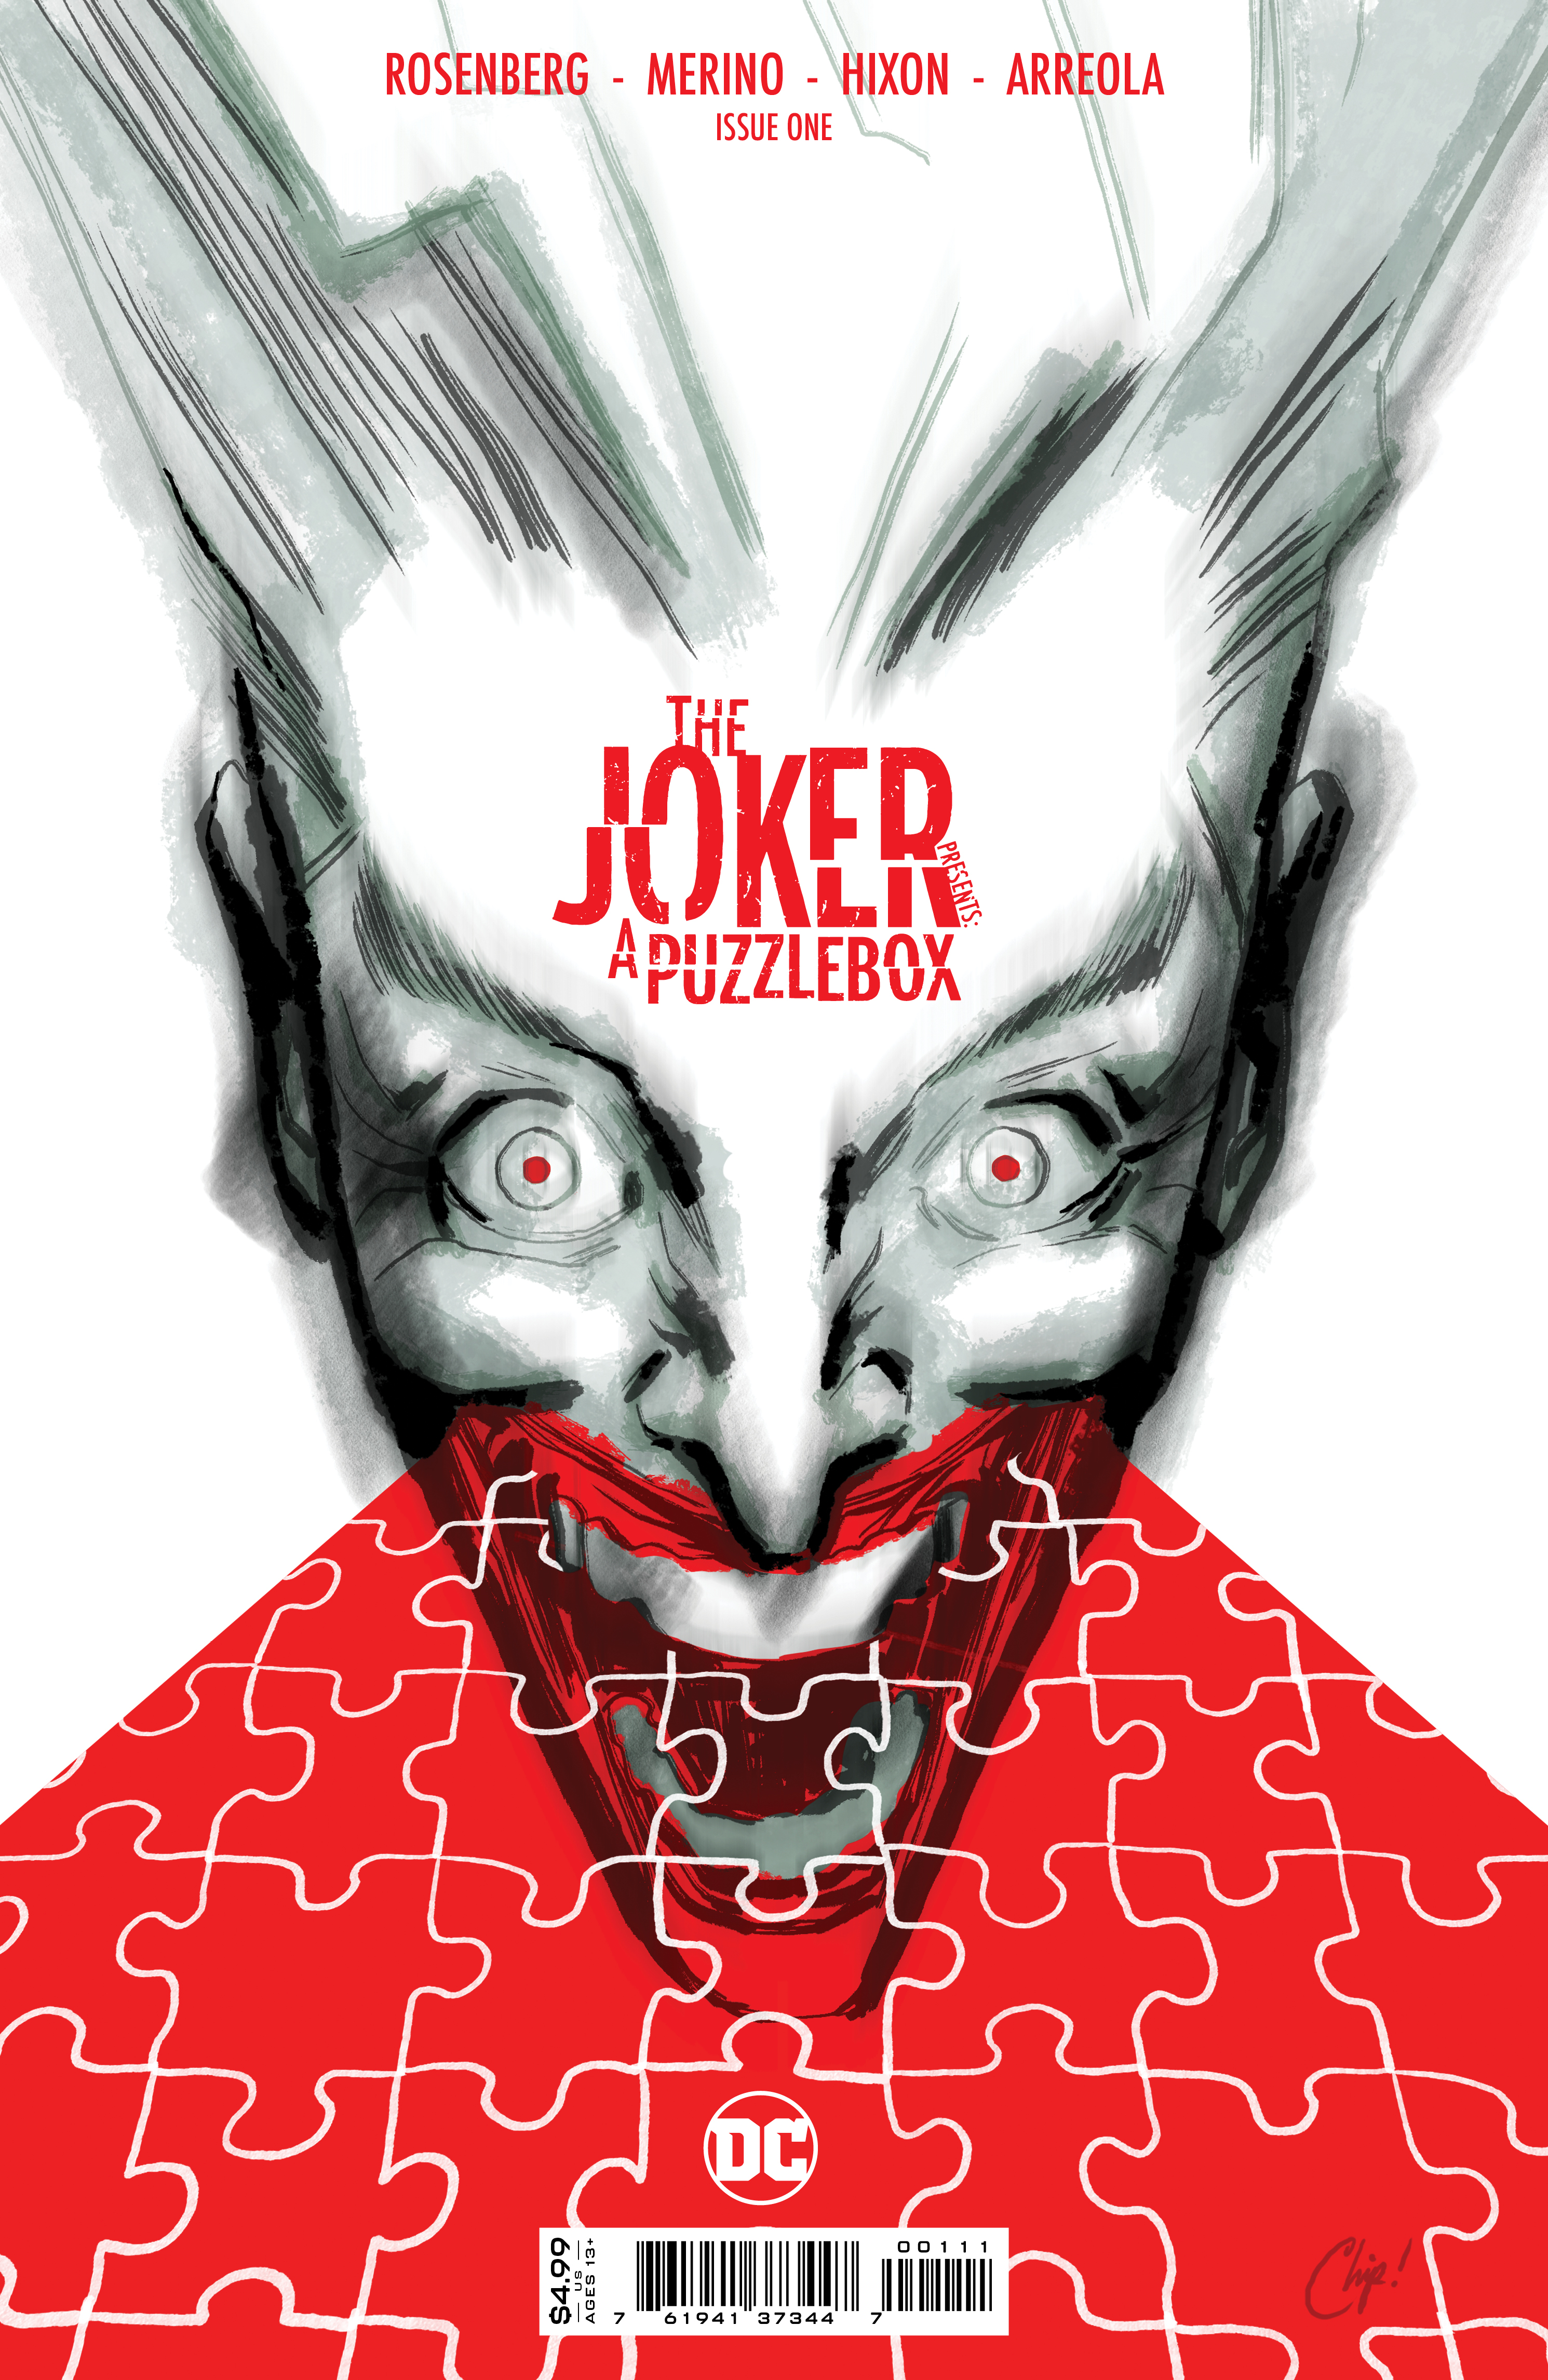 Joker Presents A Puzzlebox #1 Cover A Chip Zdarsky (Of 7)